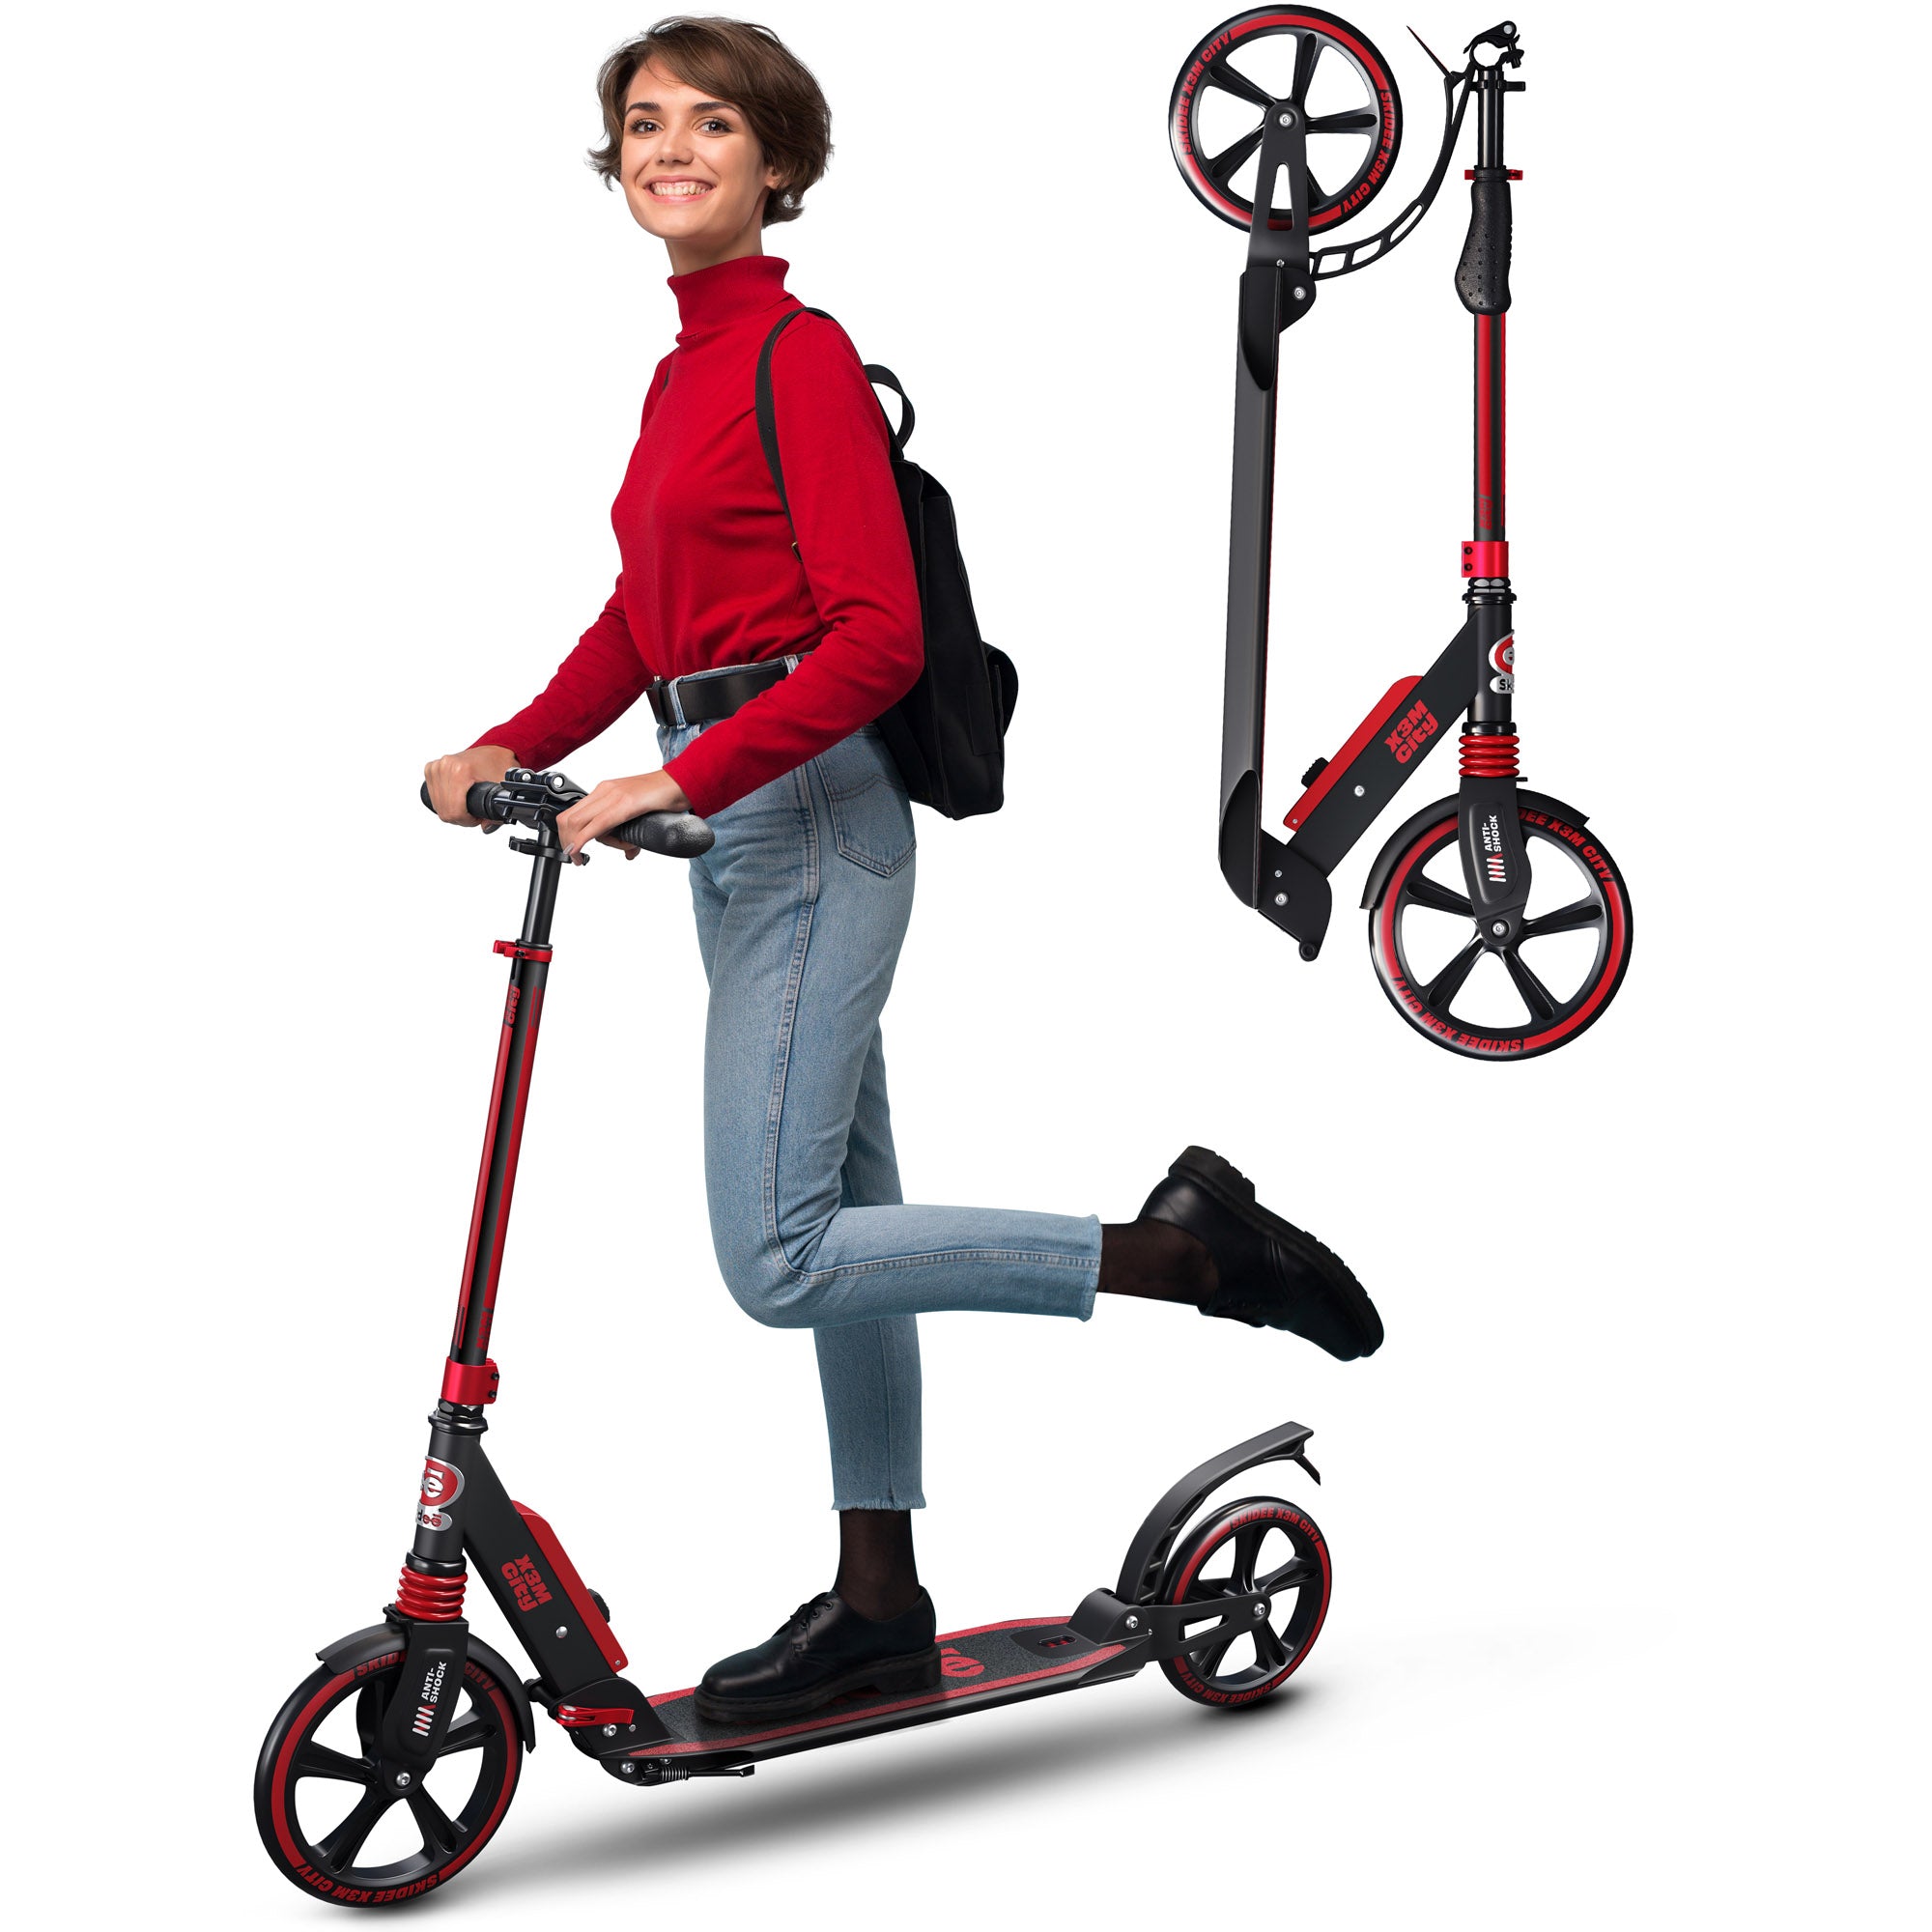 X3M Scooter for Kids Ages 6-12 - Scooters for Teens 12 Years and Up - Adult Scooter with Anti-Shock Suspension - Scooter for Kids 8 Years and Up with 4 Adjustment Levels Handlebar Up to 41 Inches High